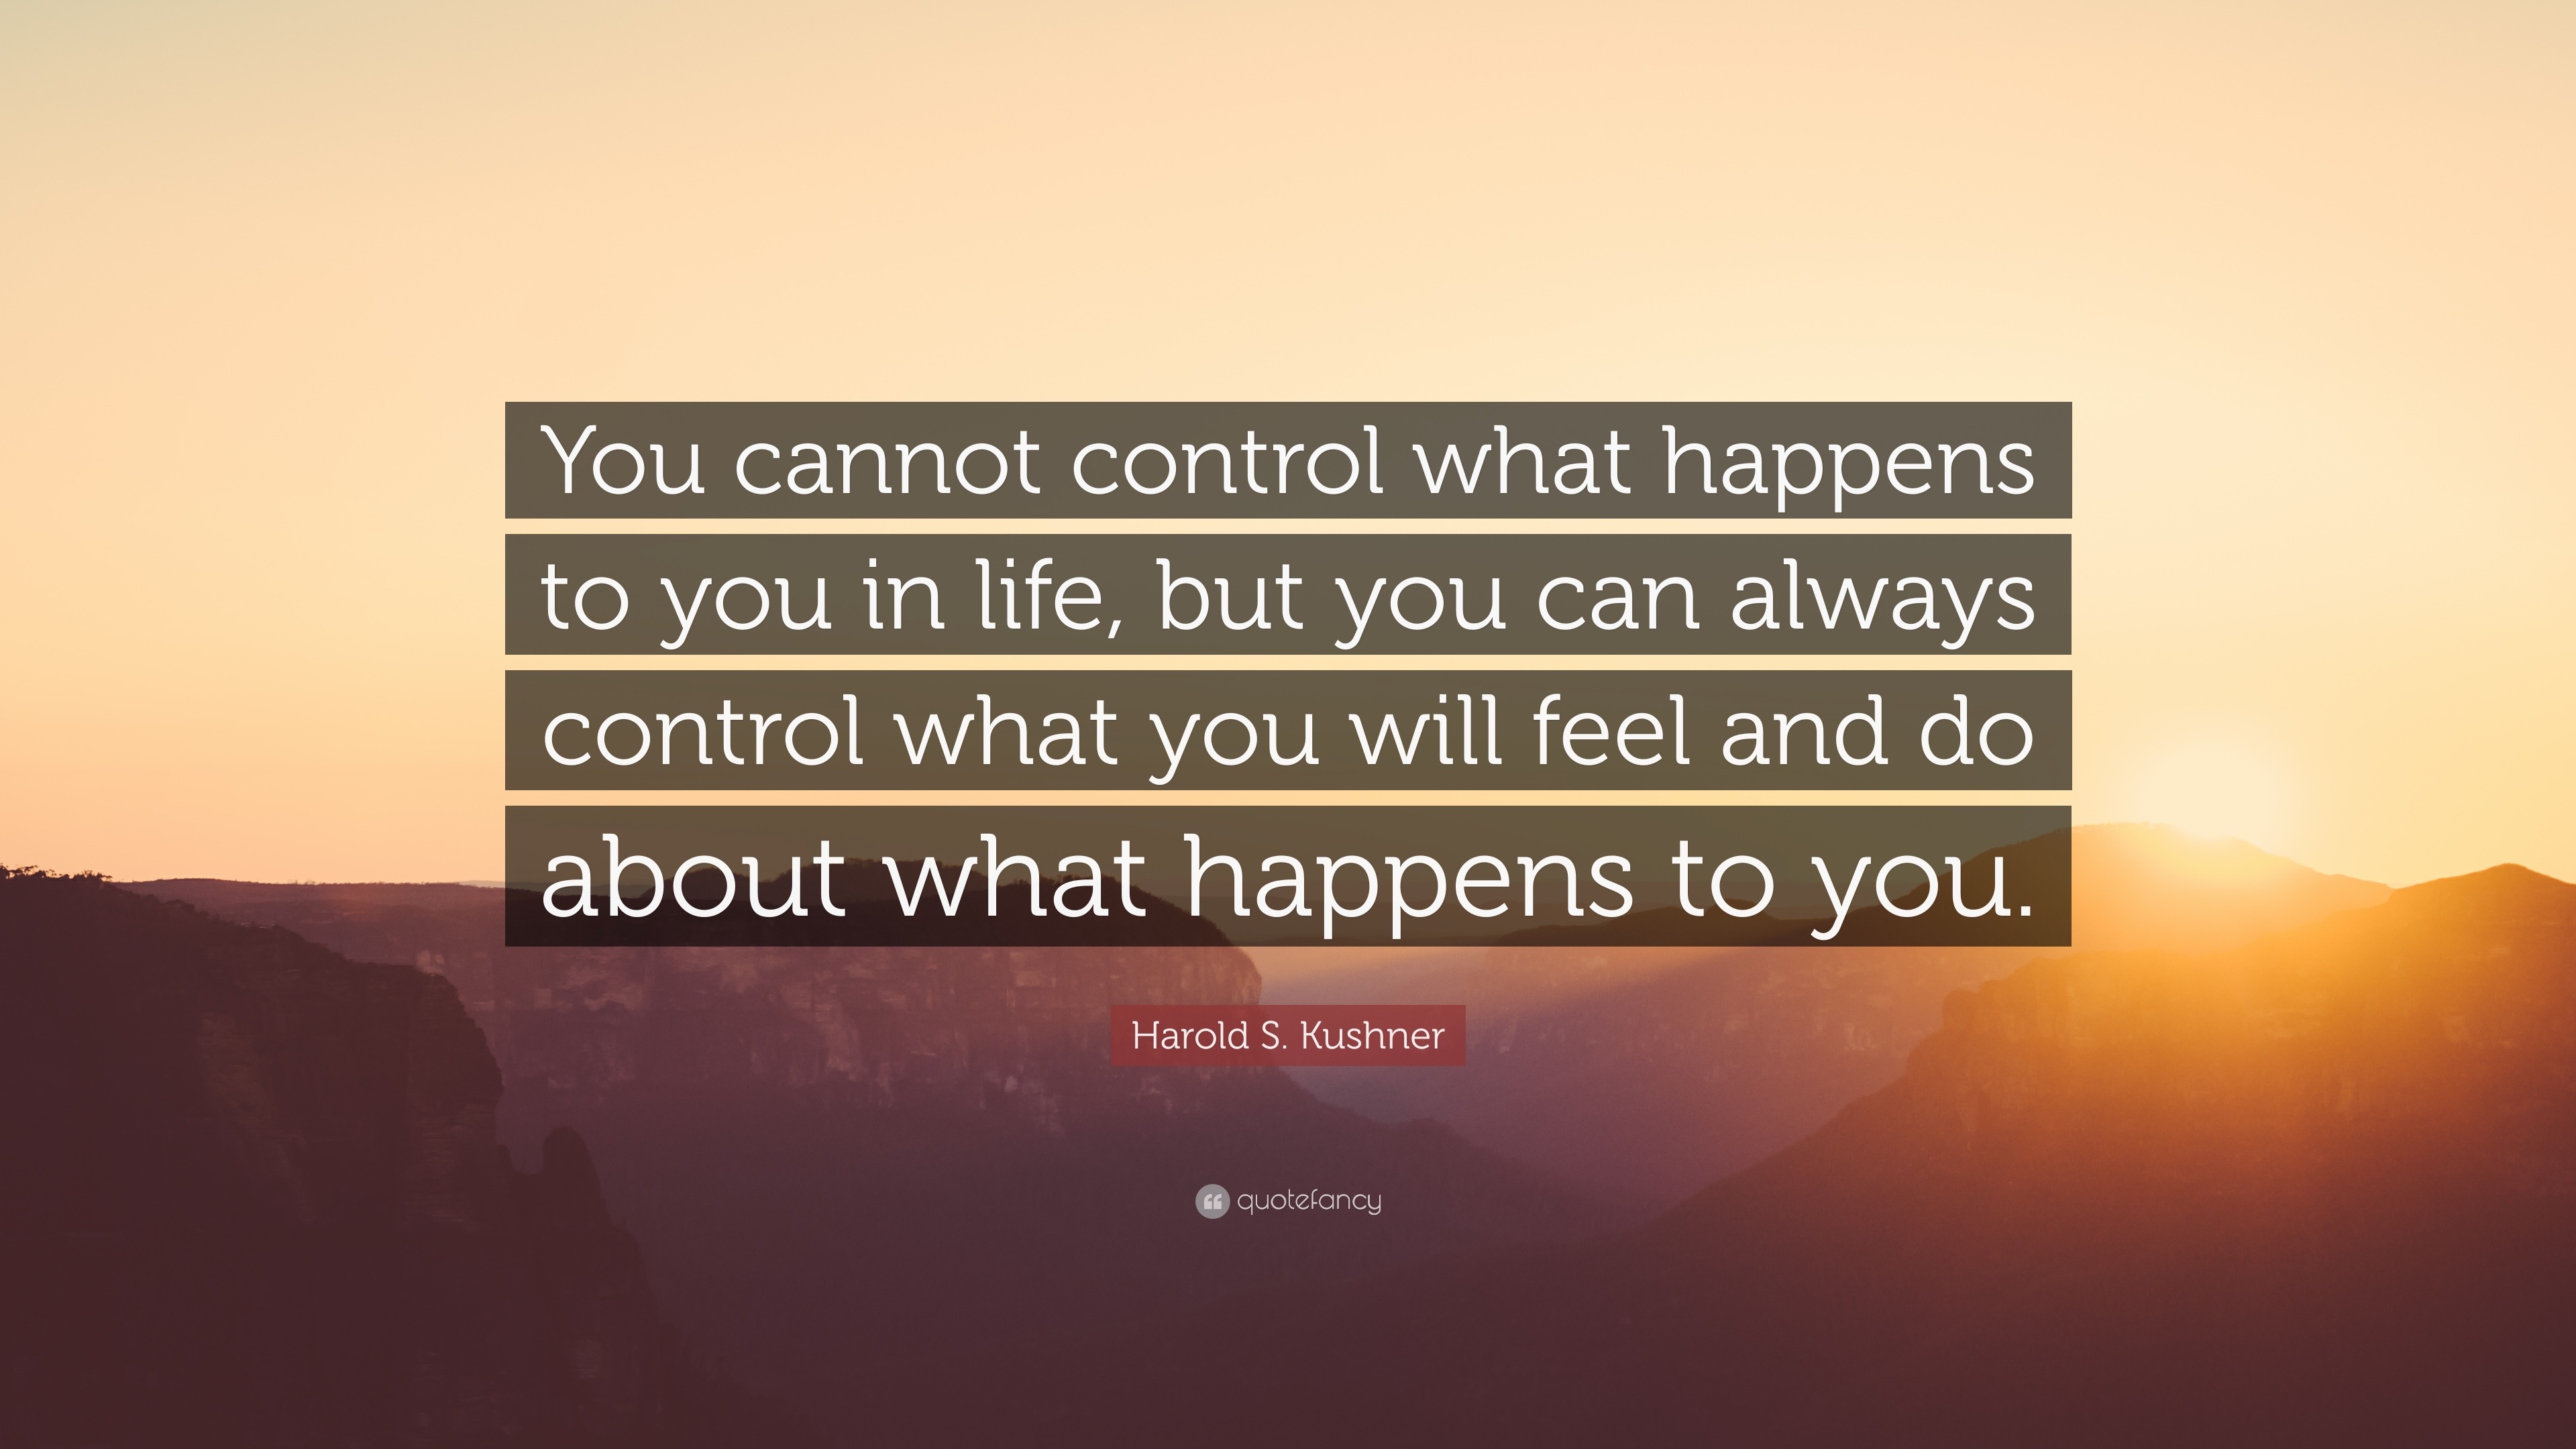 Harold S. Kushner Quote: “You cannot control what happens to you in ...